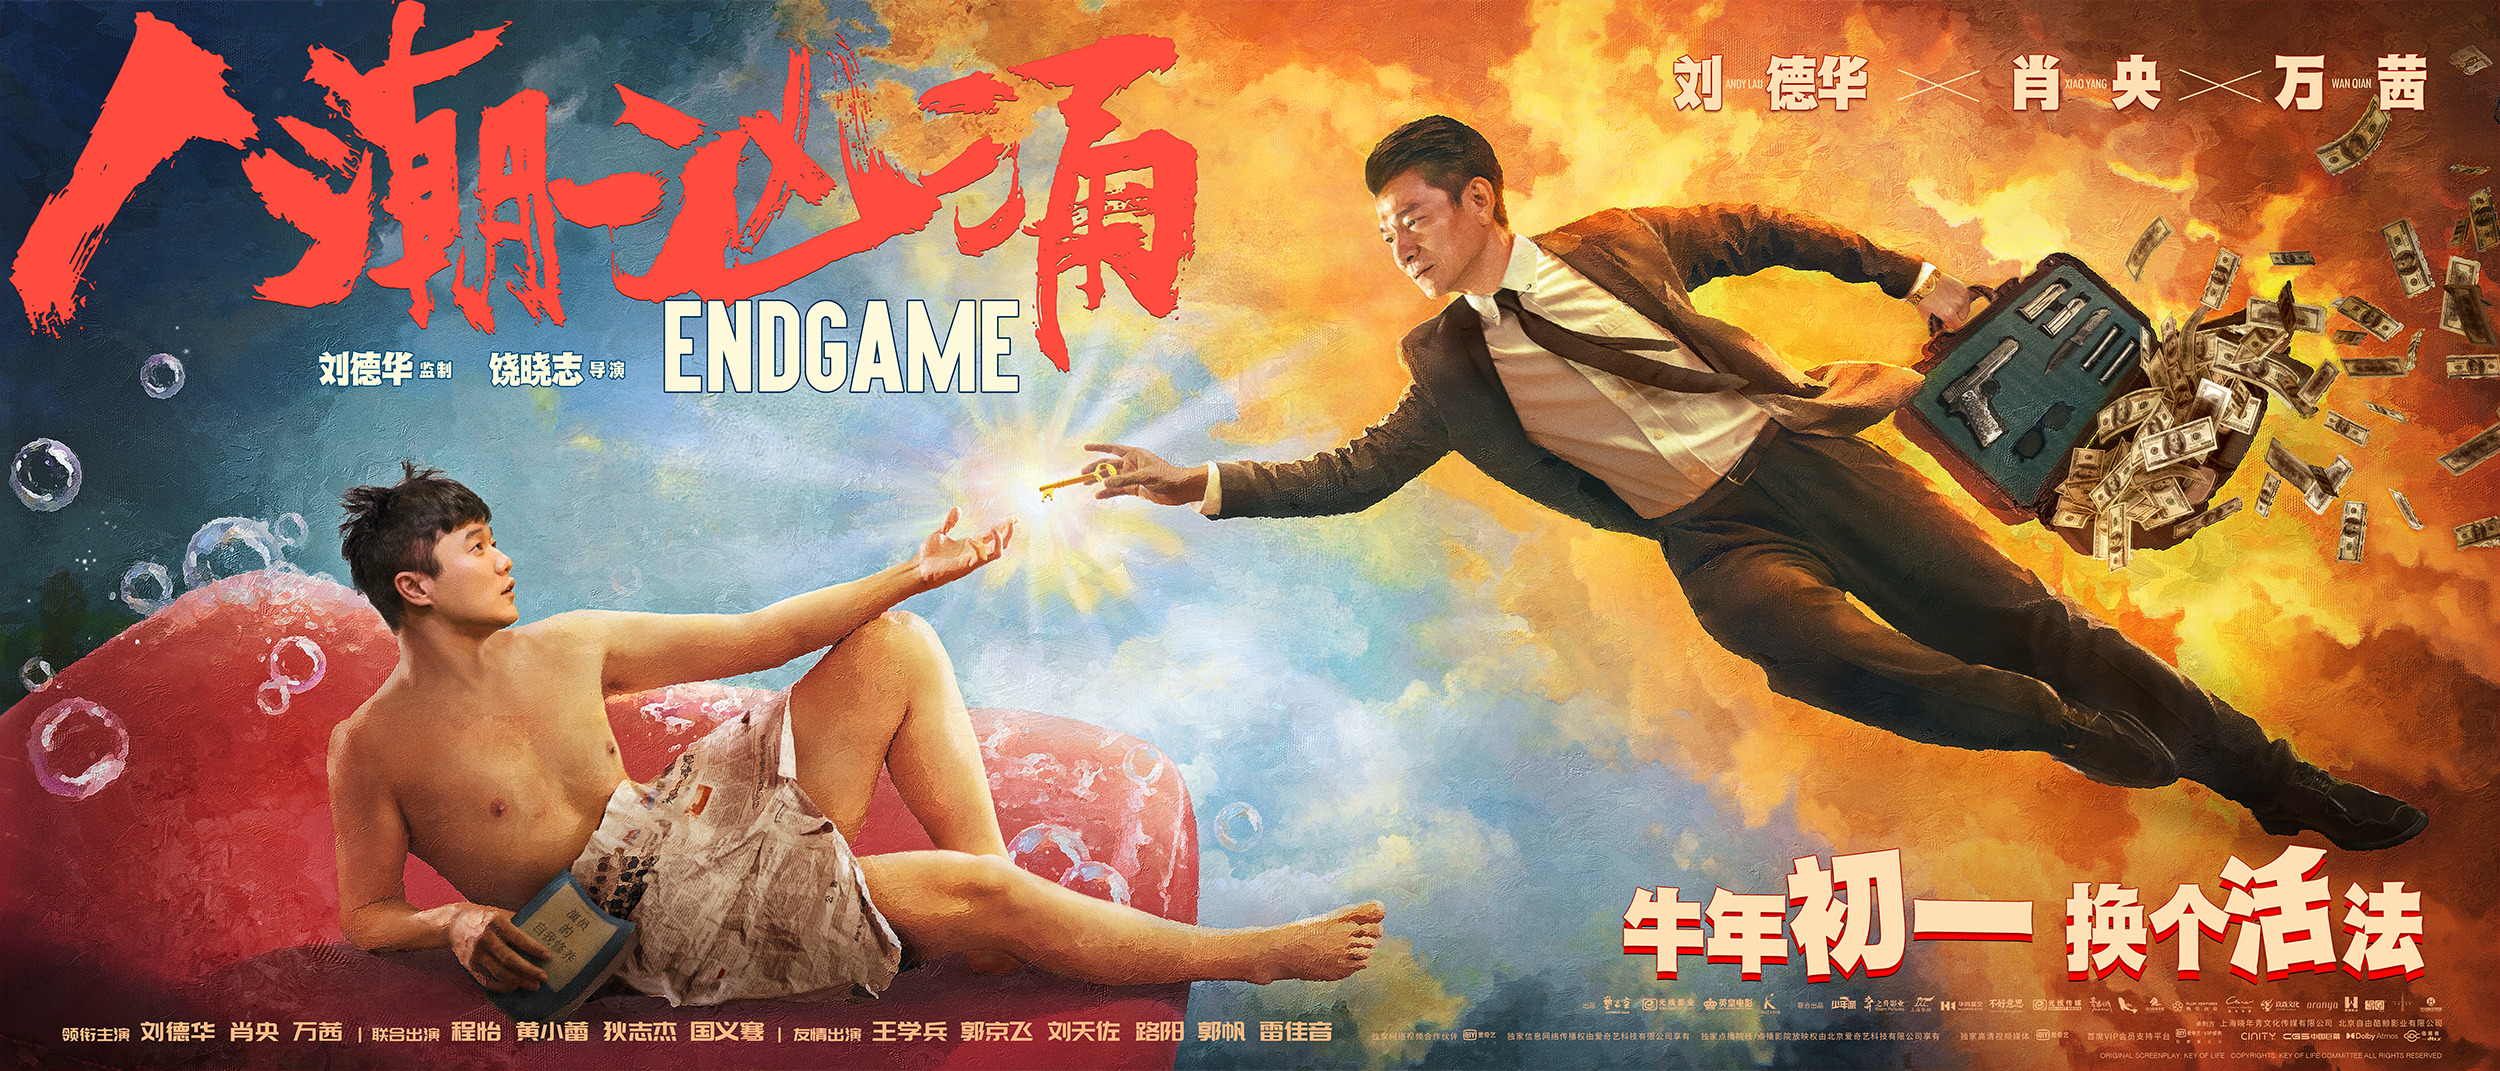 Mega Sized Movie Poster Image for Ren Chao Xiong Yong (#2 of 2)